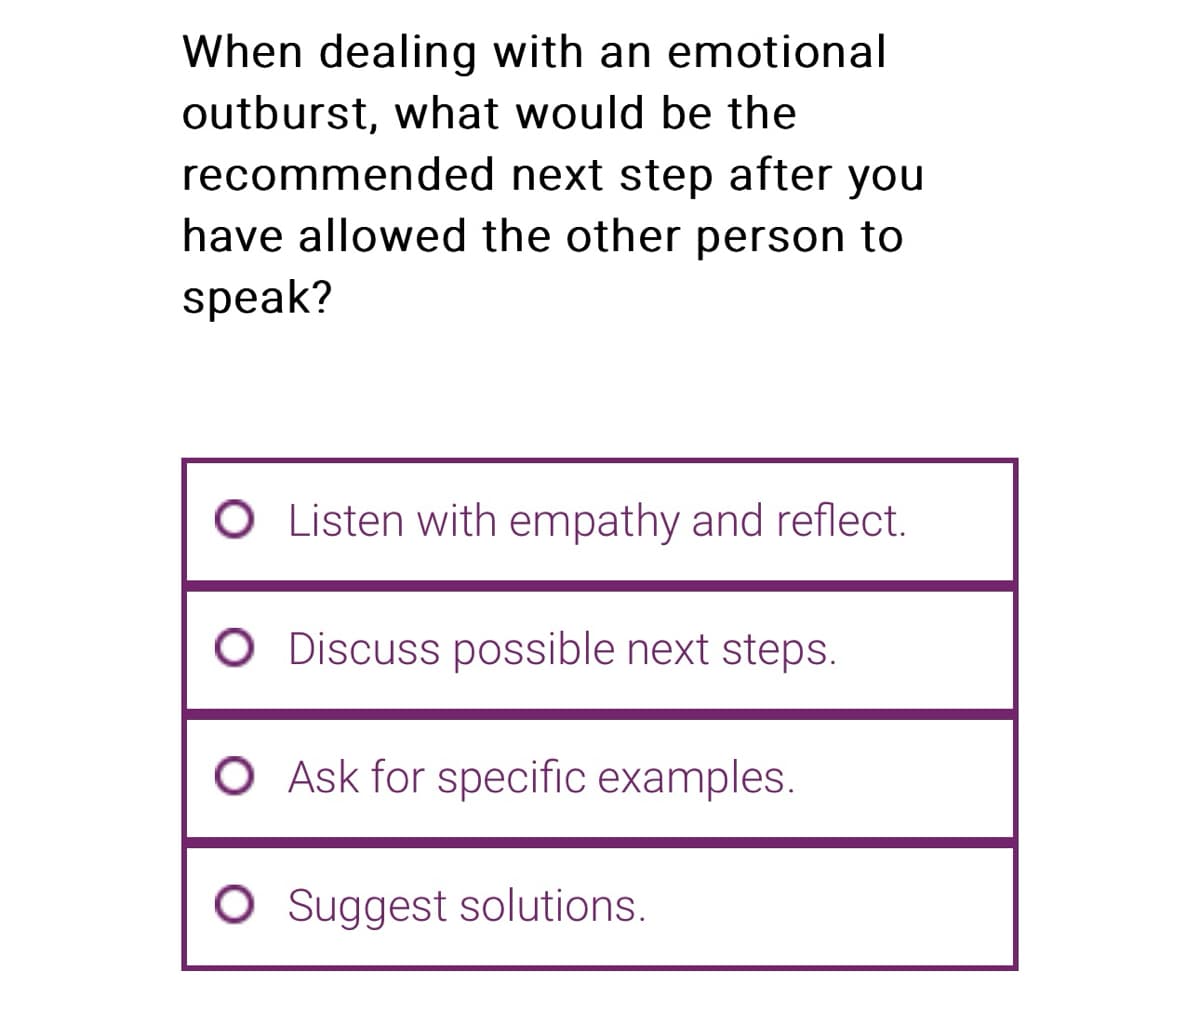 When dealing with an emotional
outburst, what would be the
recommended next step after you
have allowed the other person to
speak?
Listen with empathy and reflect.
O Discuss possible next steps.
O Ask for specific examples.
O Suggest solutions.